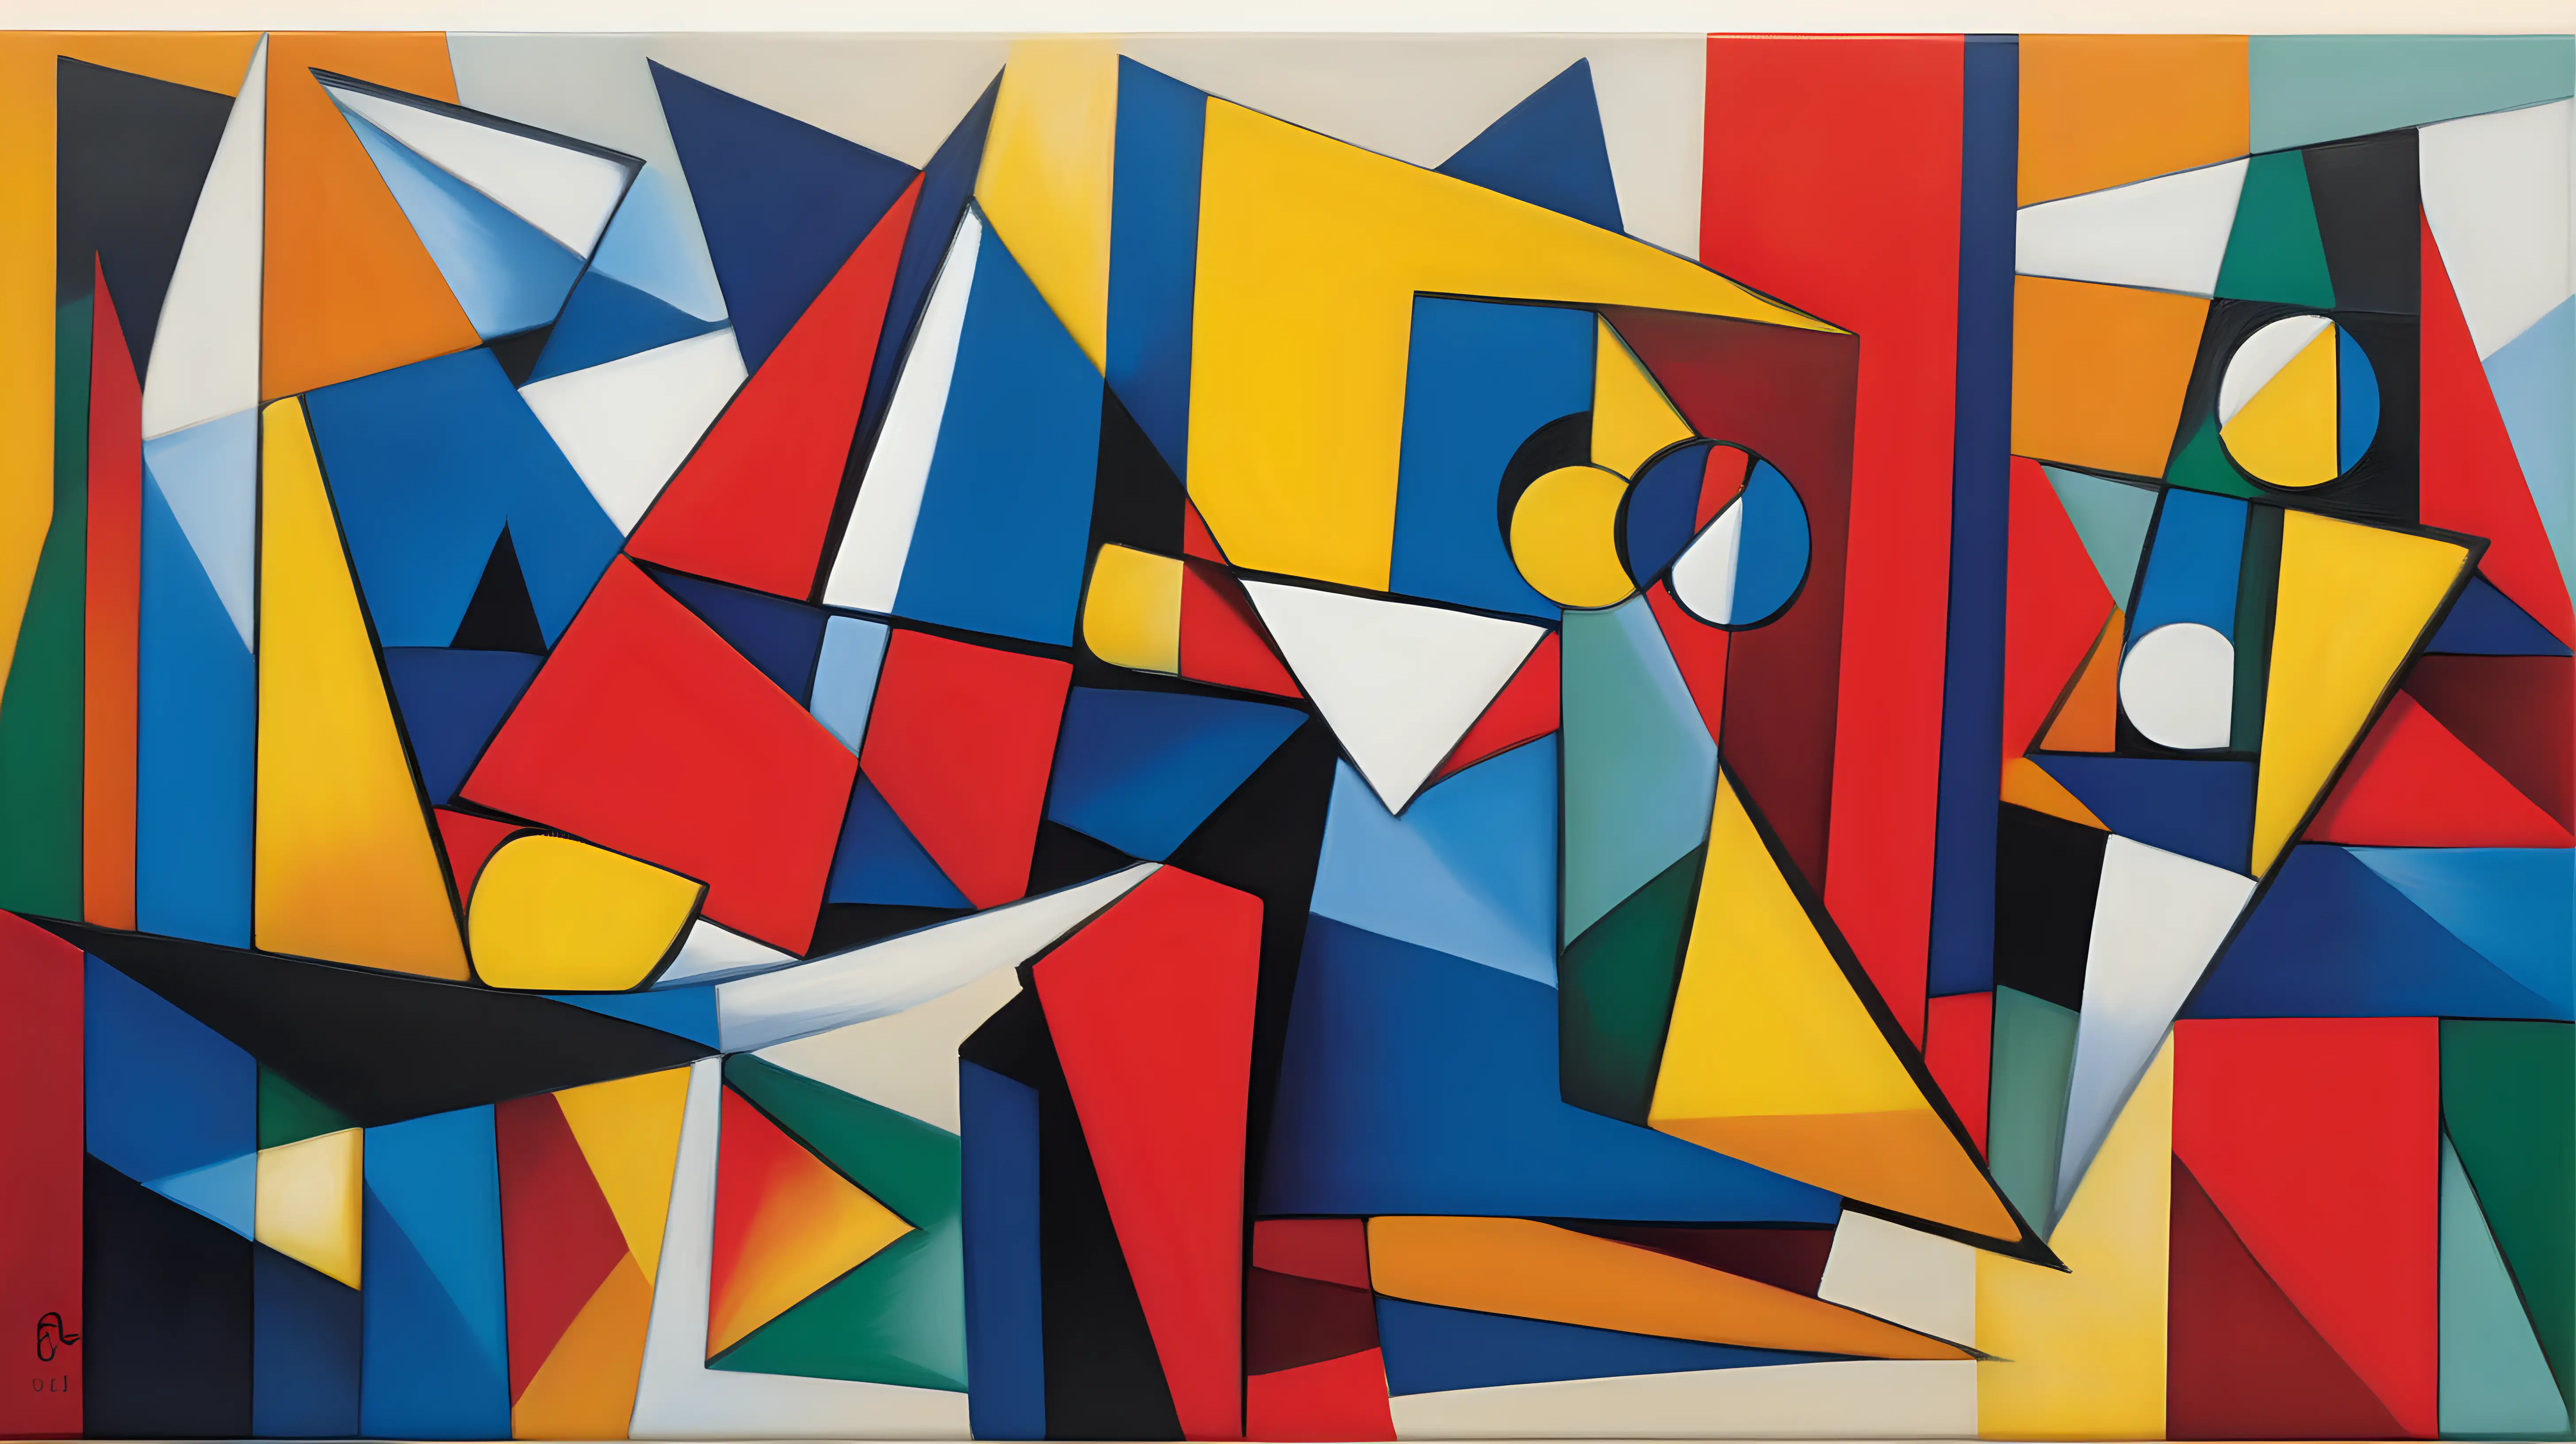 Bold Primary Color Cubist Composition Inspired by Picasso